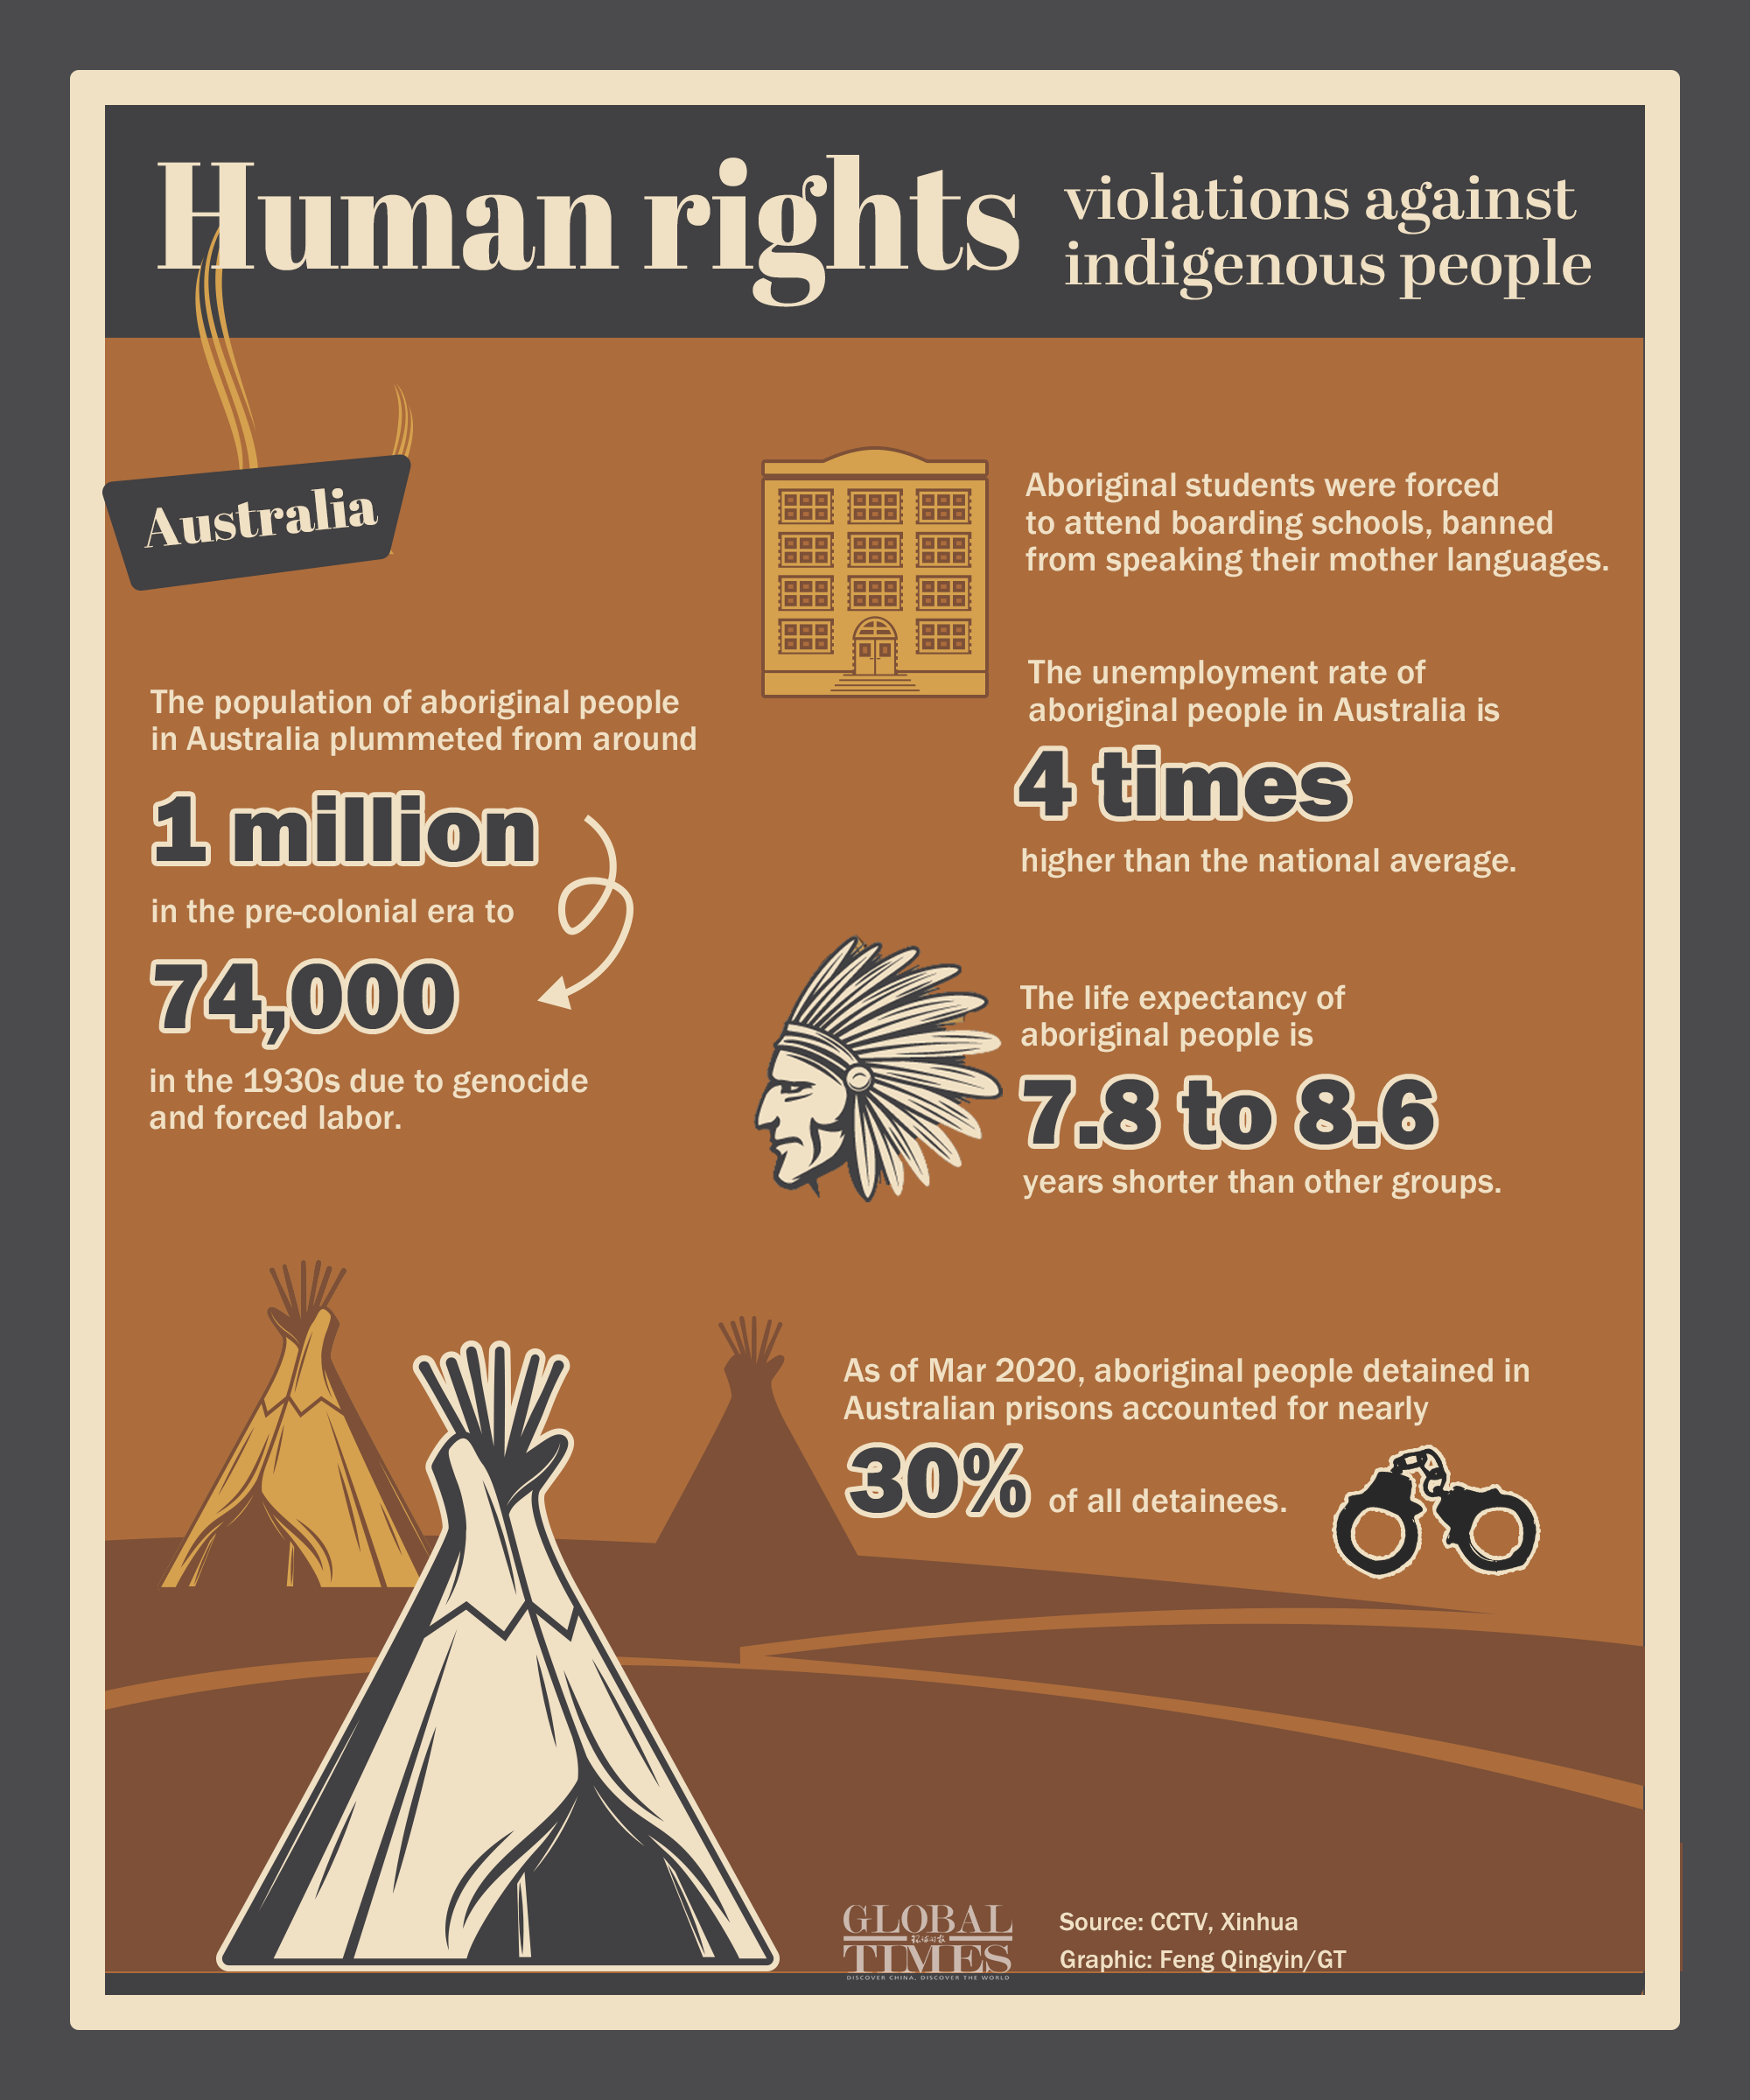 Human rights violations against indigenous people in Australia Graphic: Feng Qingyin/GT